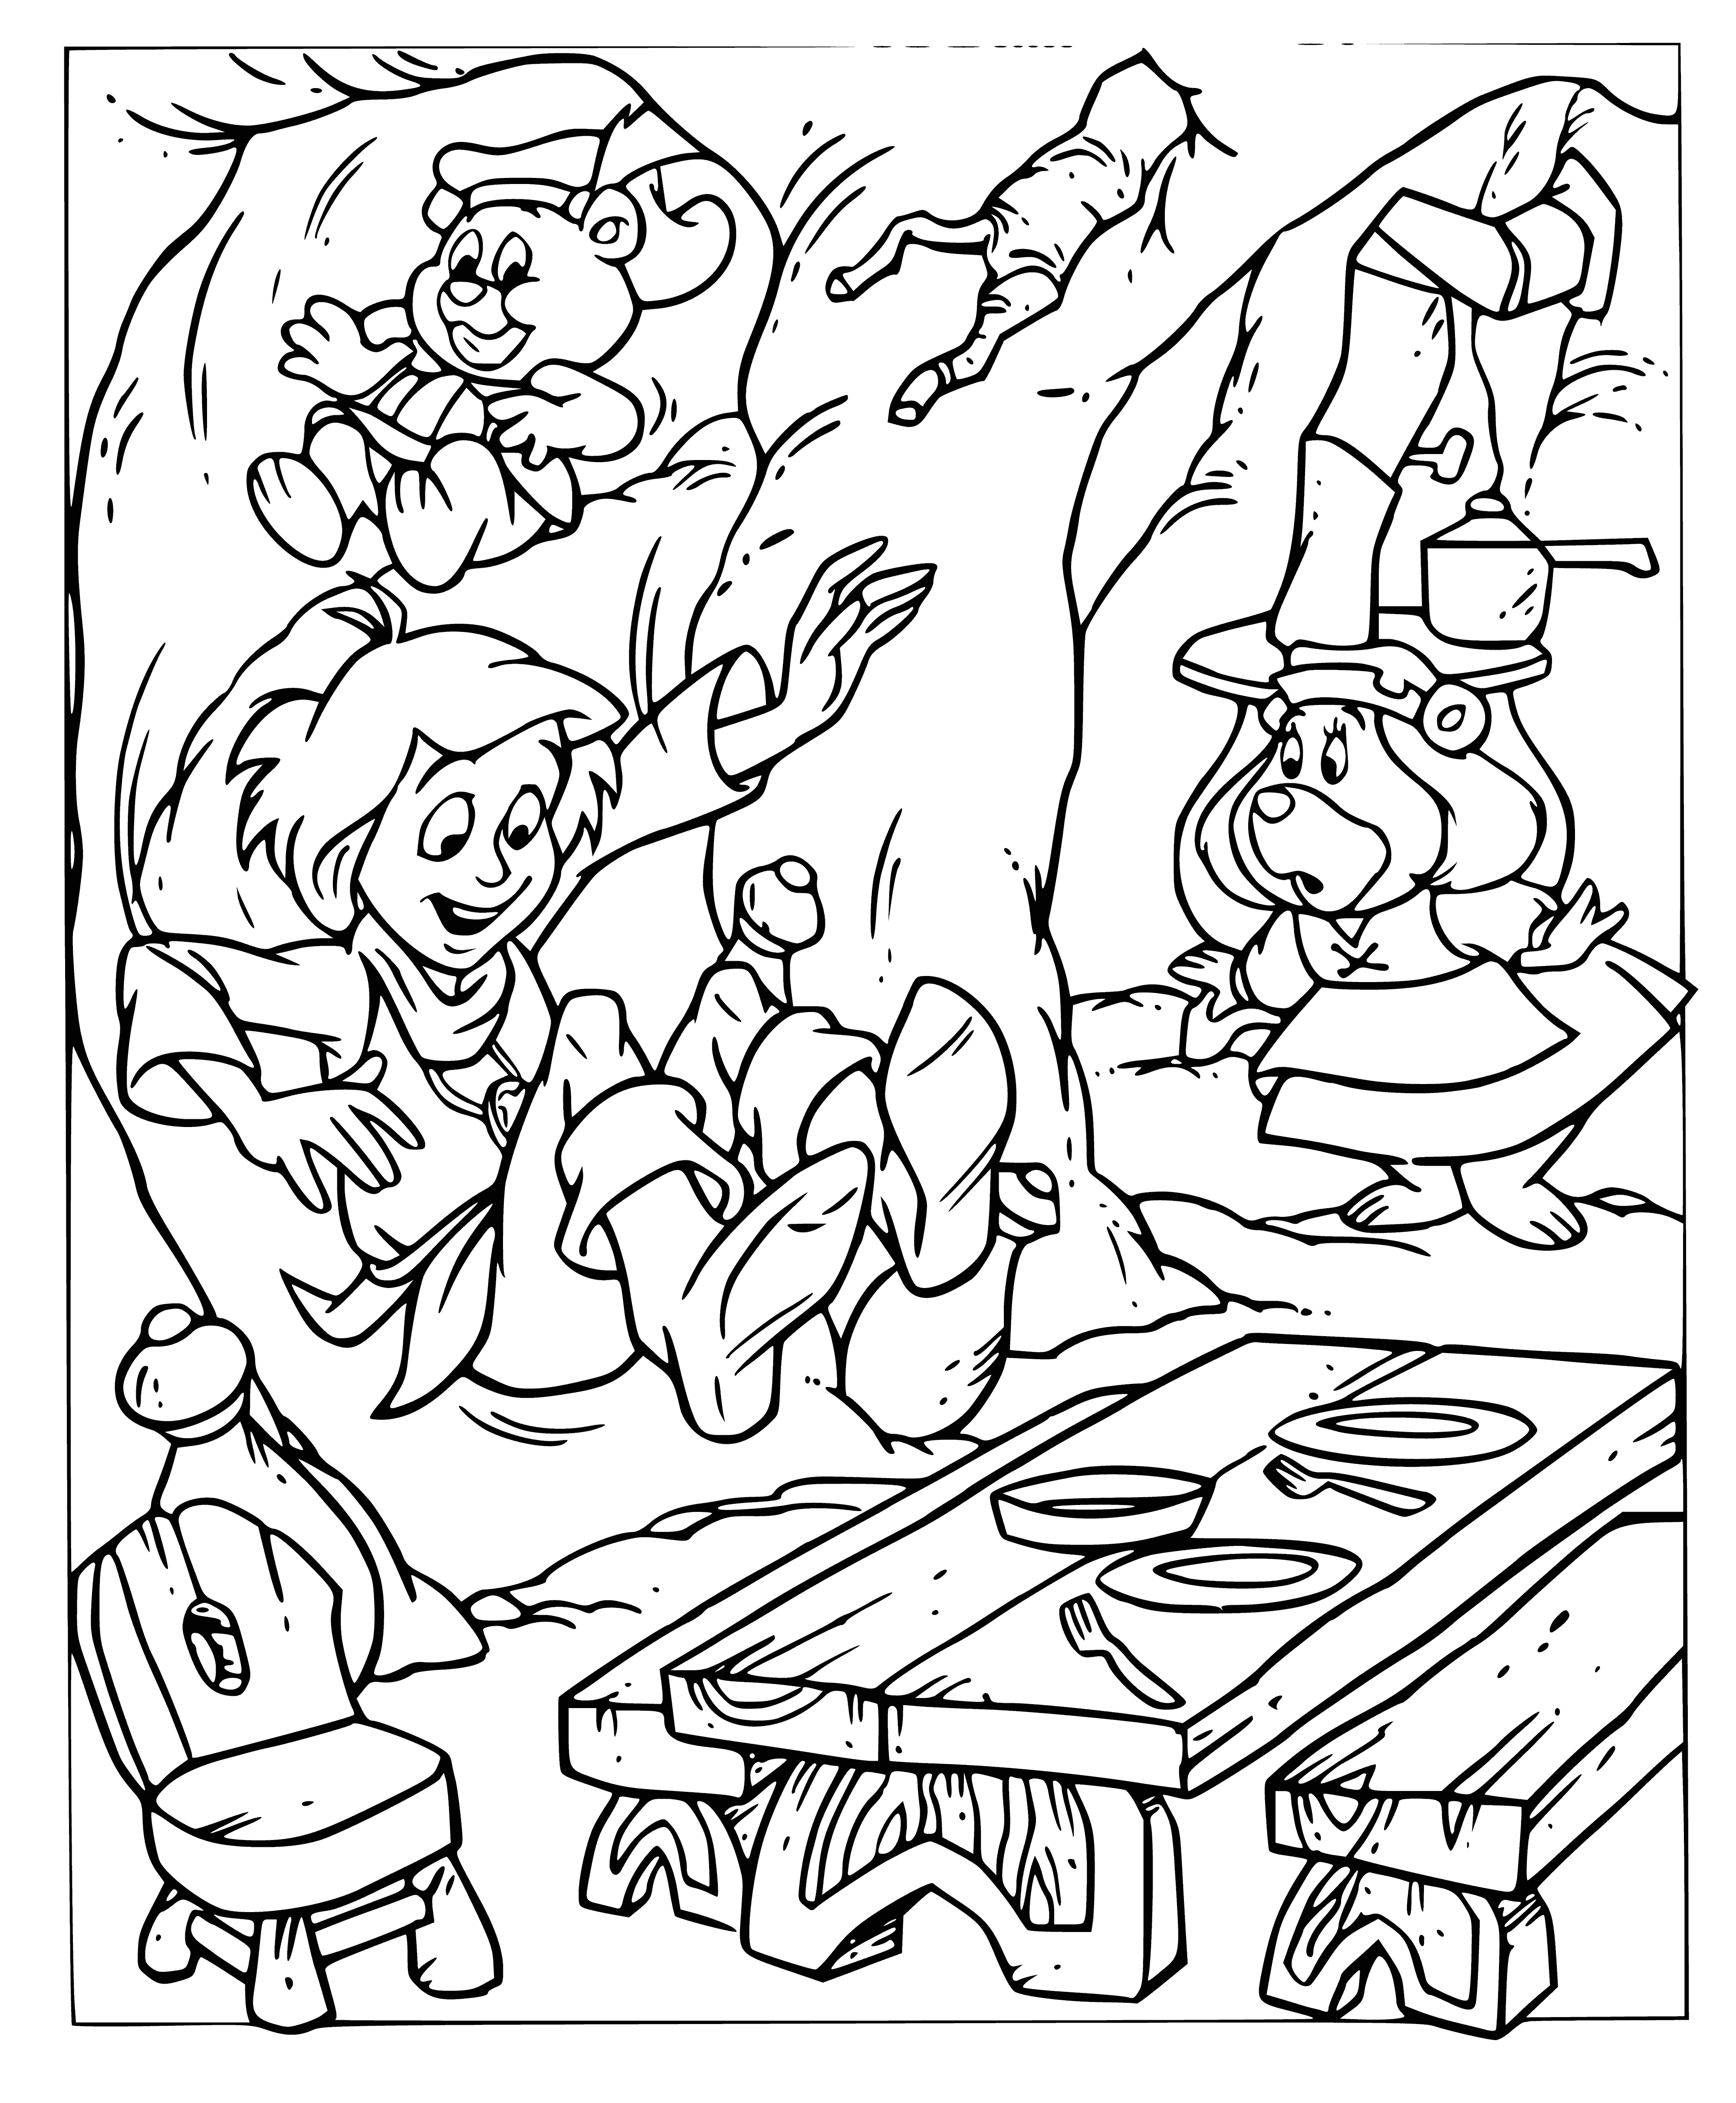 coloring page: Five gummi bears, each in a different color (yellow, green, orange, brown, and pink), are standing on their hind legs with outstretched arms and round heads with small ears.